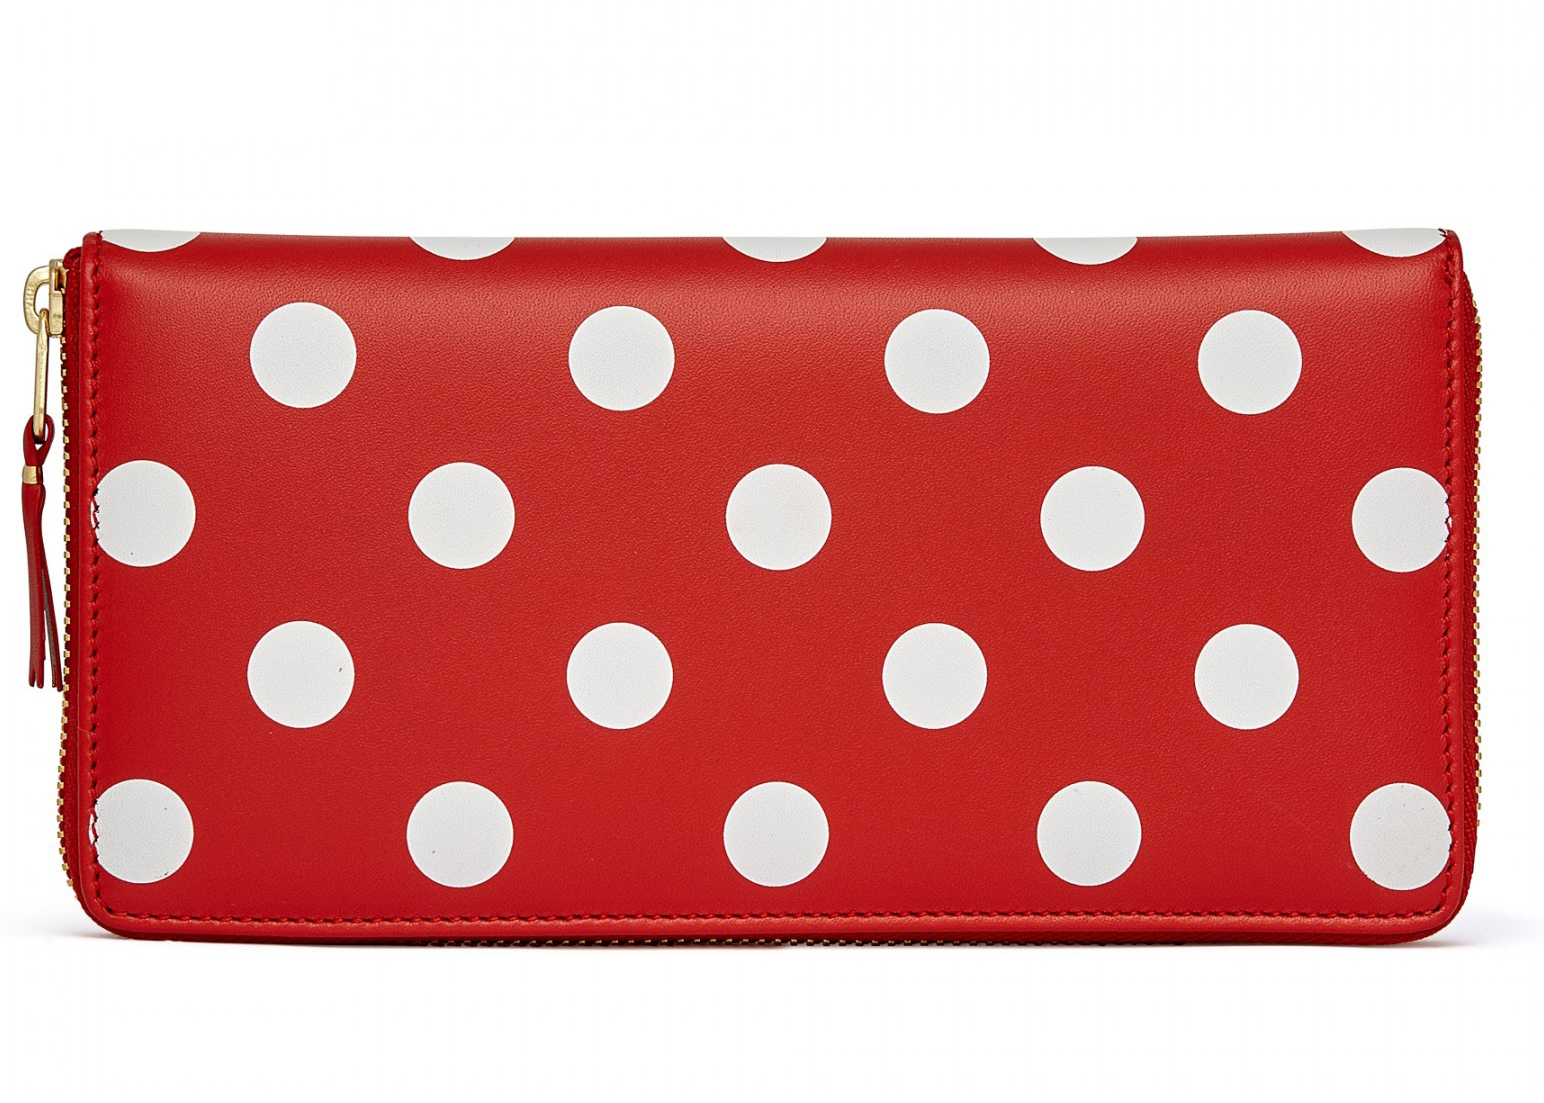 Comme des Garcons SA0110PD Wallet Polka Dots Red in Leather with